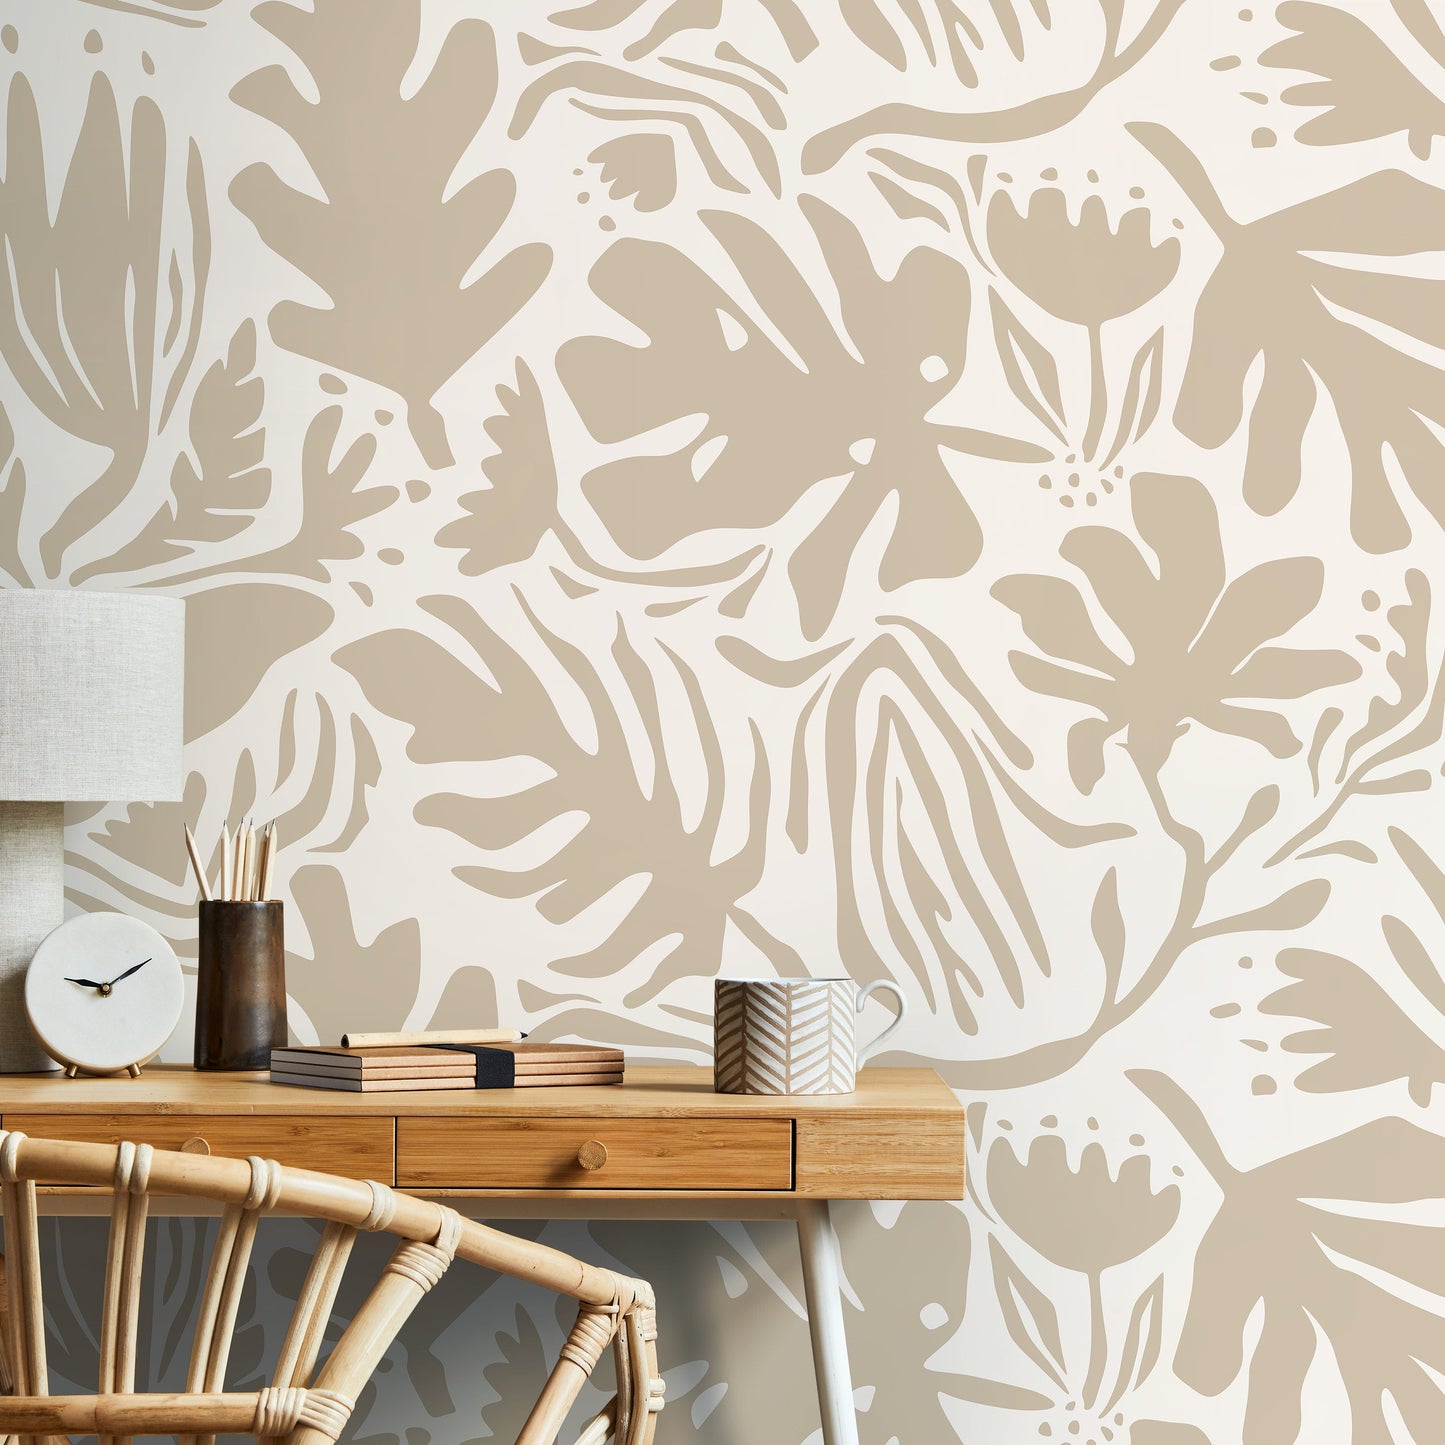 Neutral Leaf Abstract Wallpaper Boho Wallpaper Peel and Stick and Traditional Wallpaper - D665